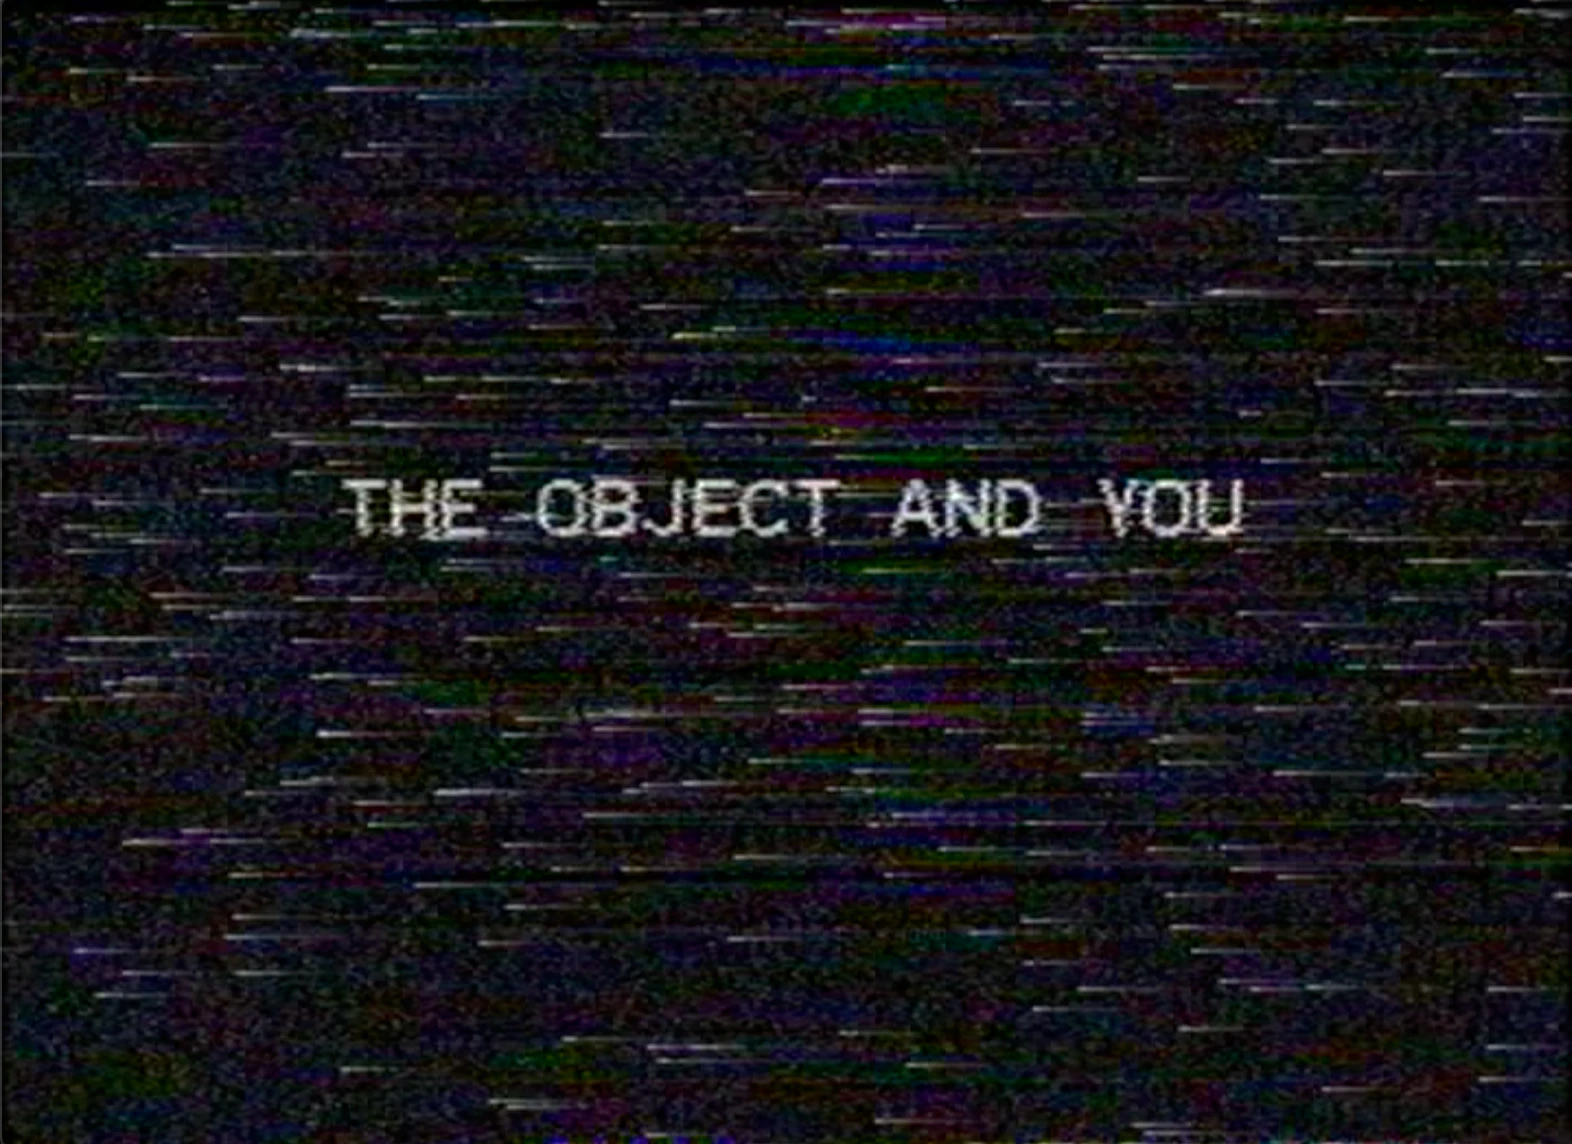 THE OBJECT AND YOU